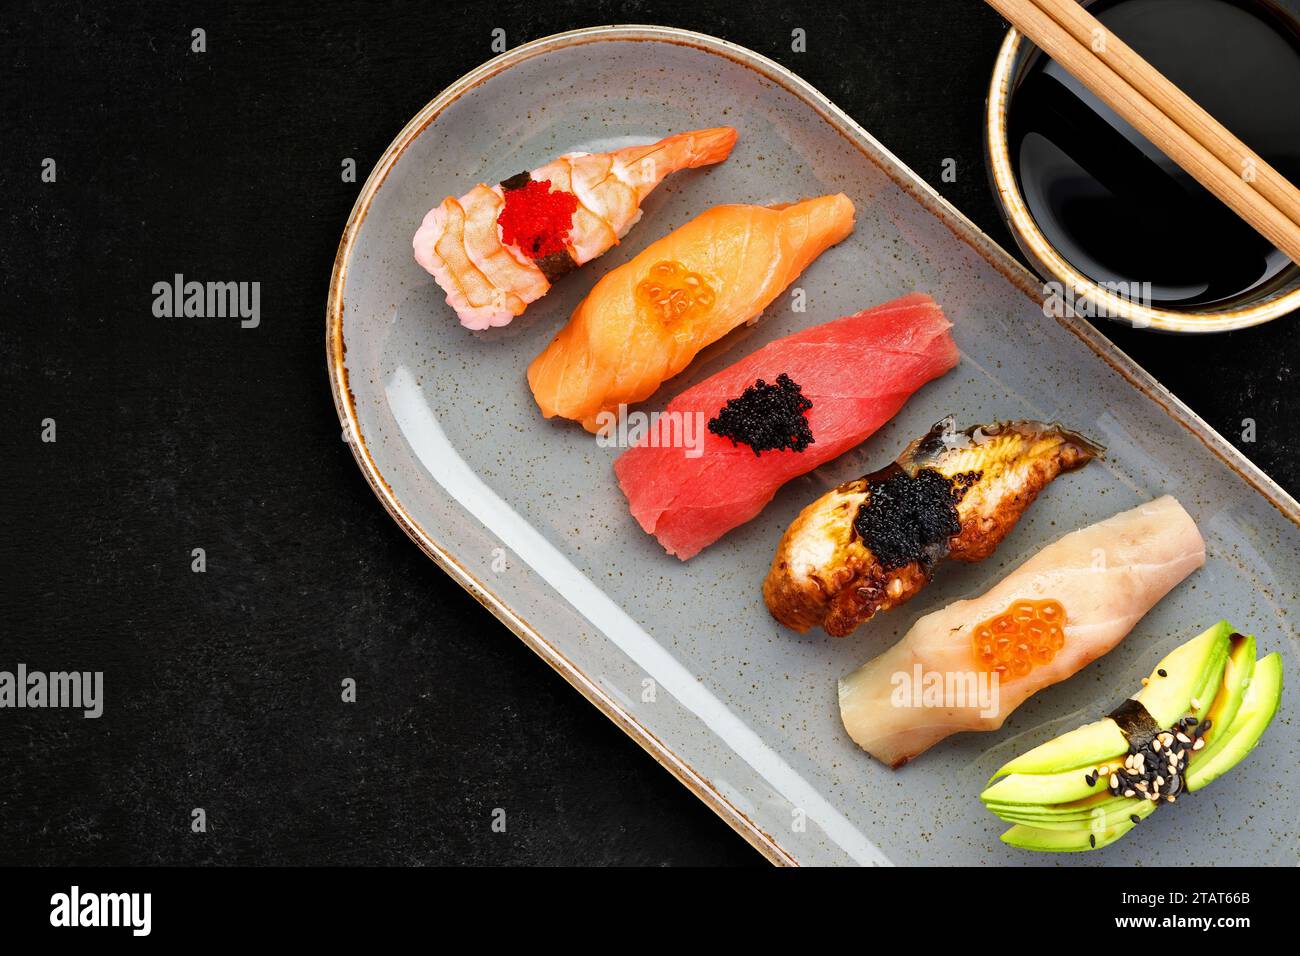 assorted nigiri sushi with a variety of flavors Stock Photo